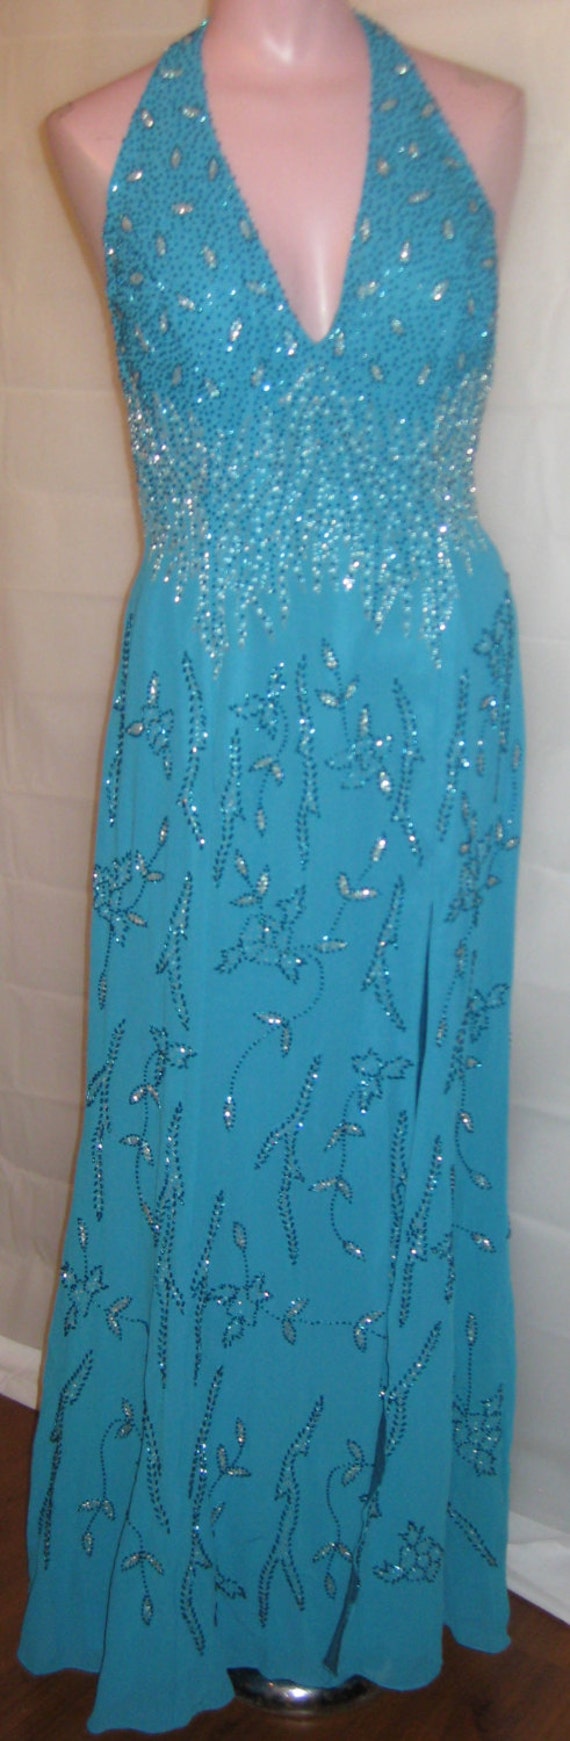 Teal Gown #7501 - image 2